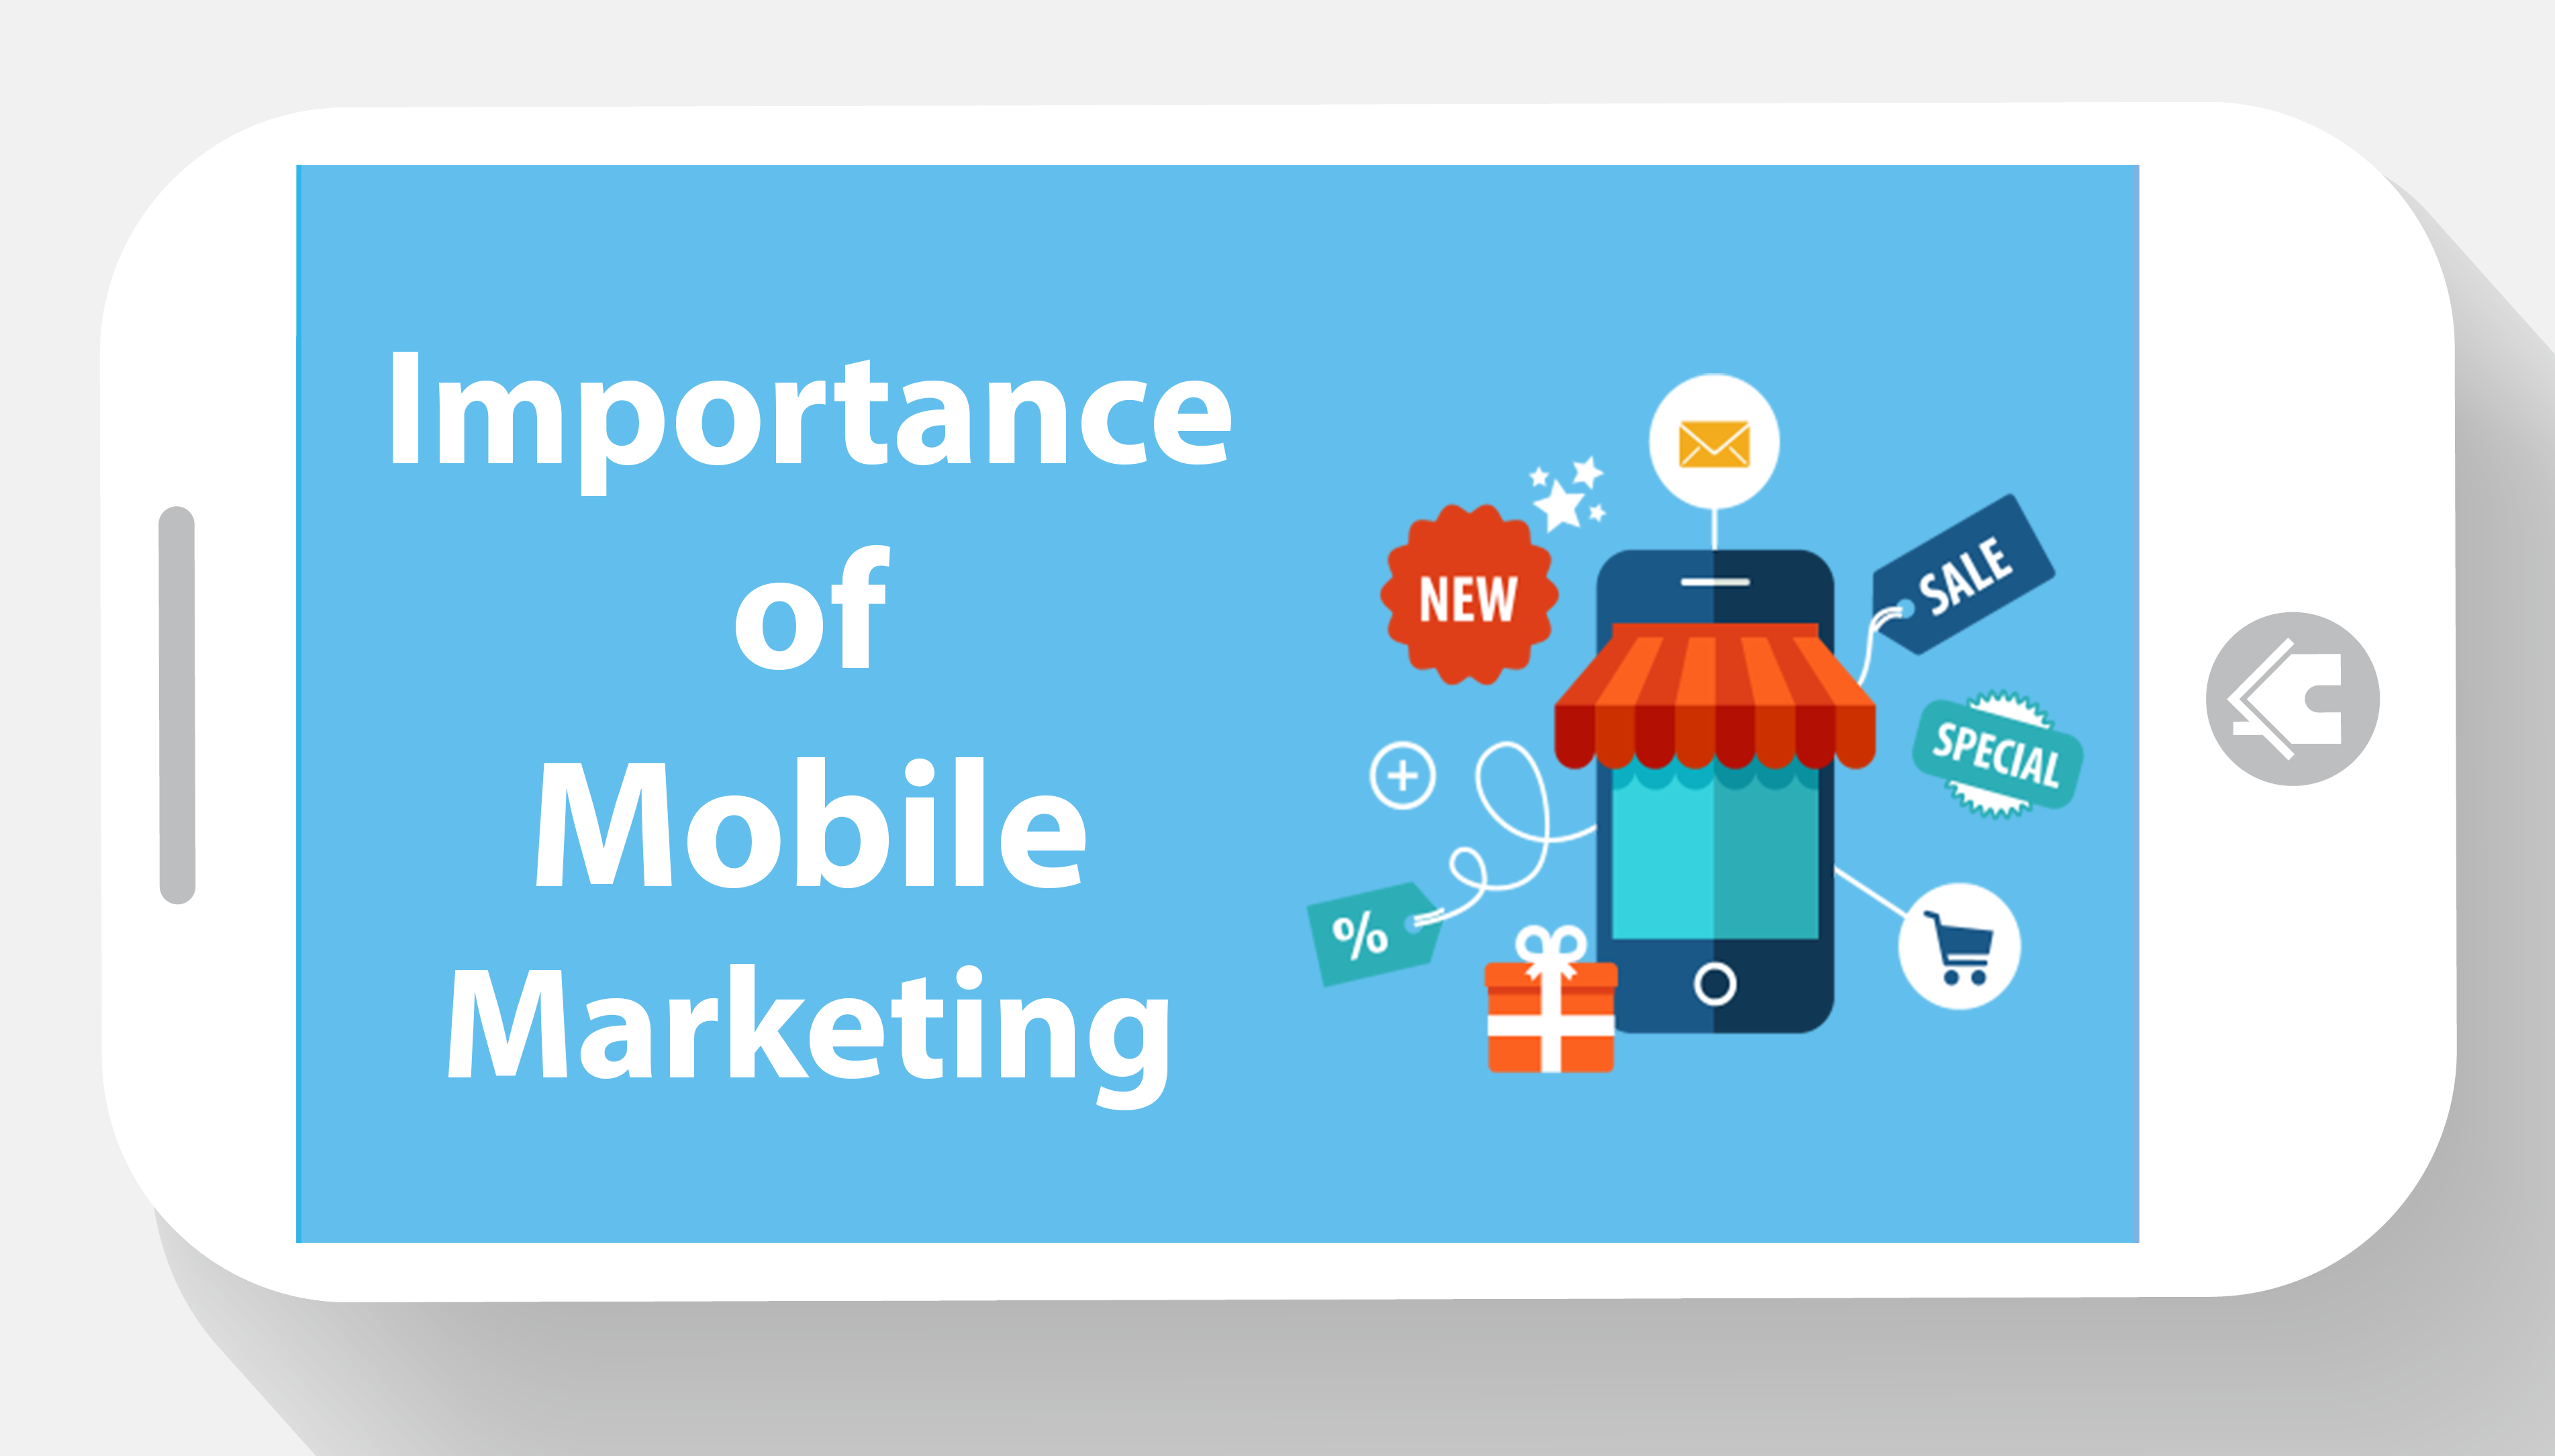 Importance of Mobile Marketing